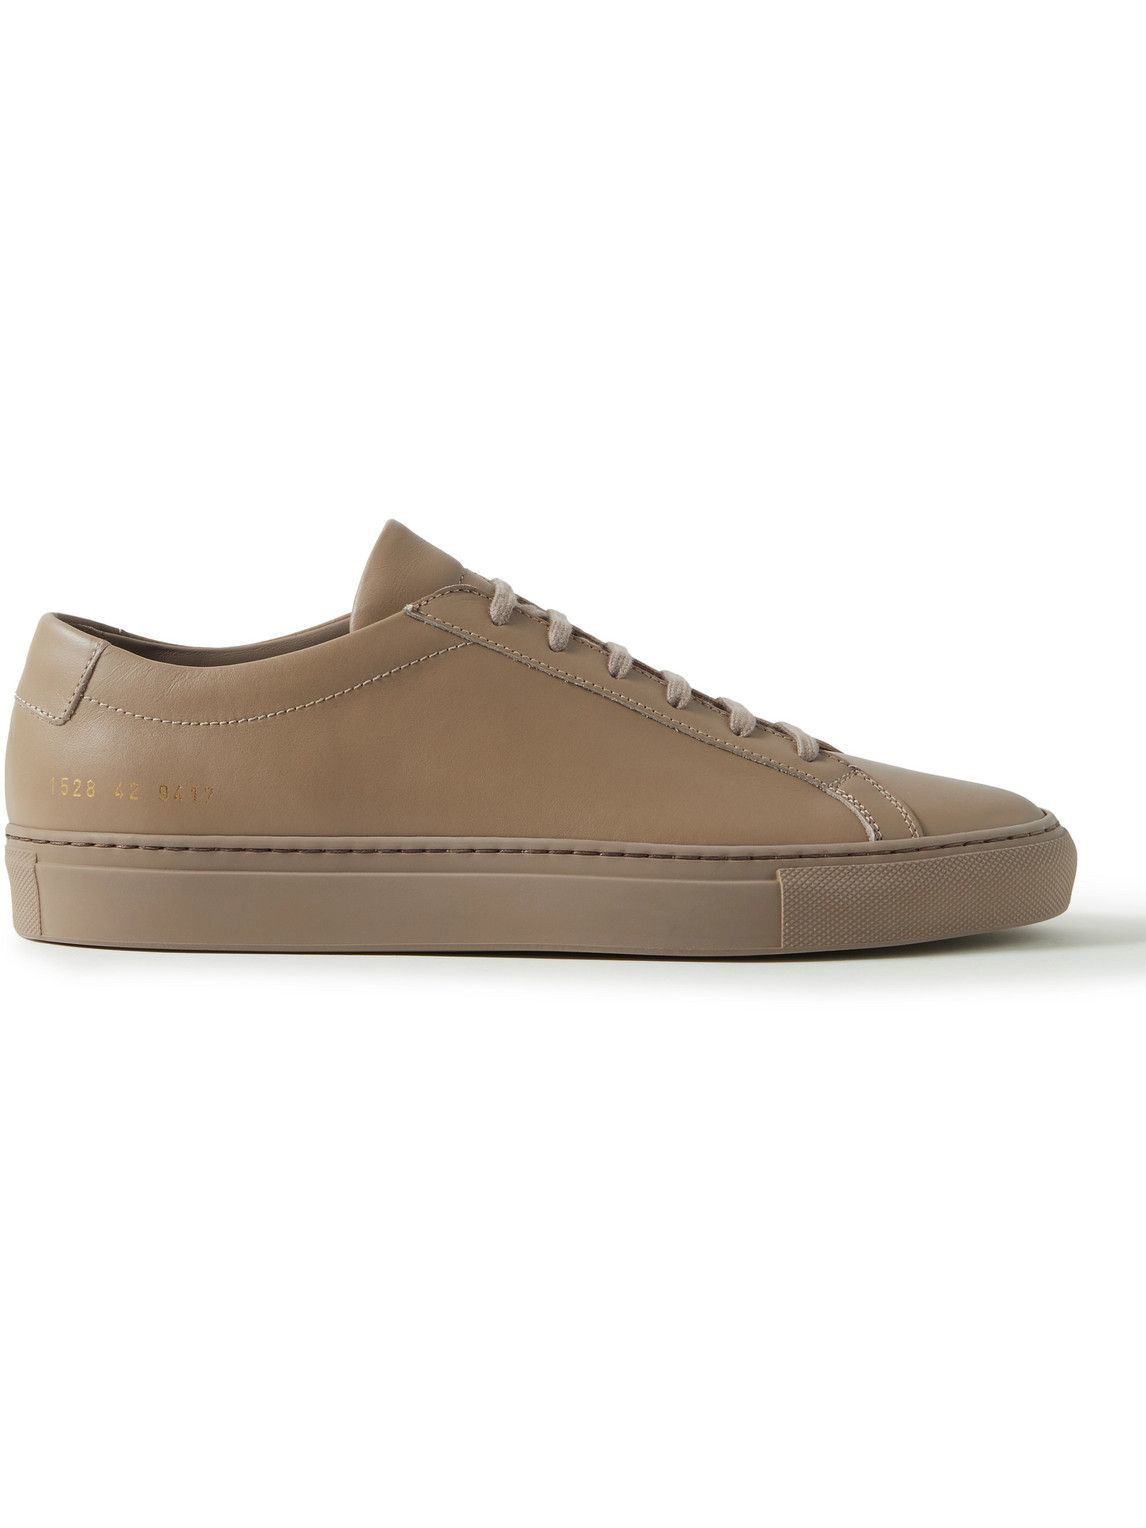 Common Projects - Original Achilles Leather Sneakers - Brown Common ...